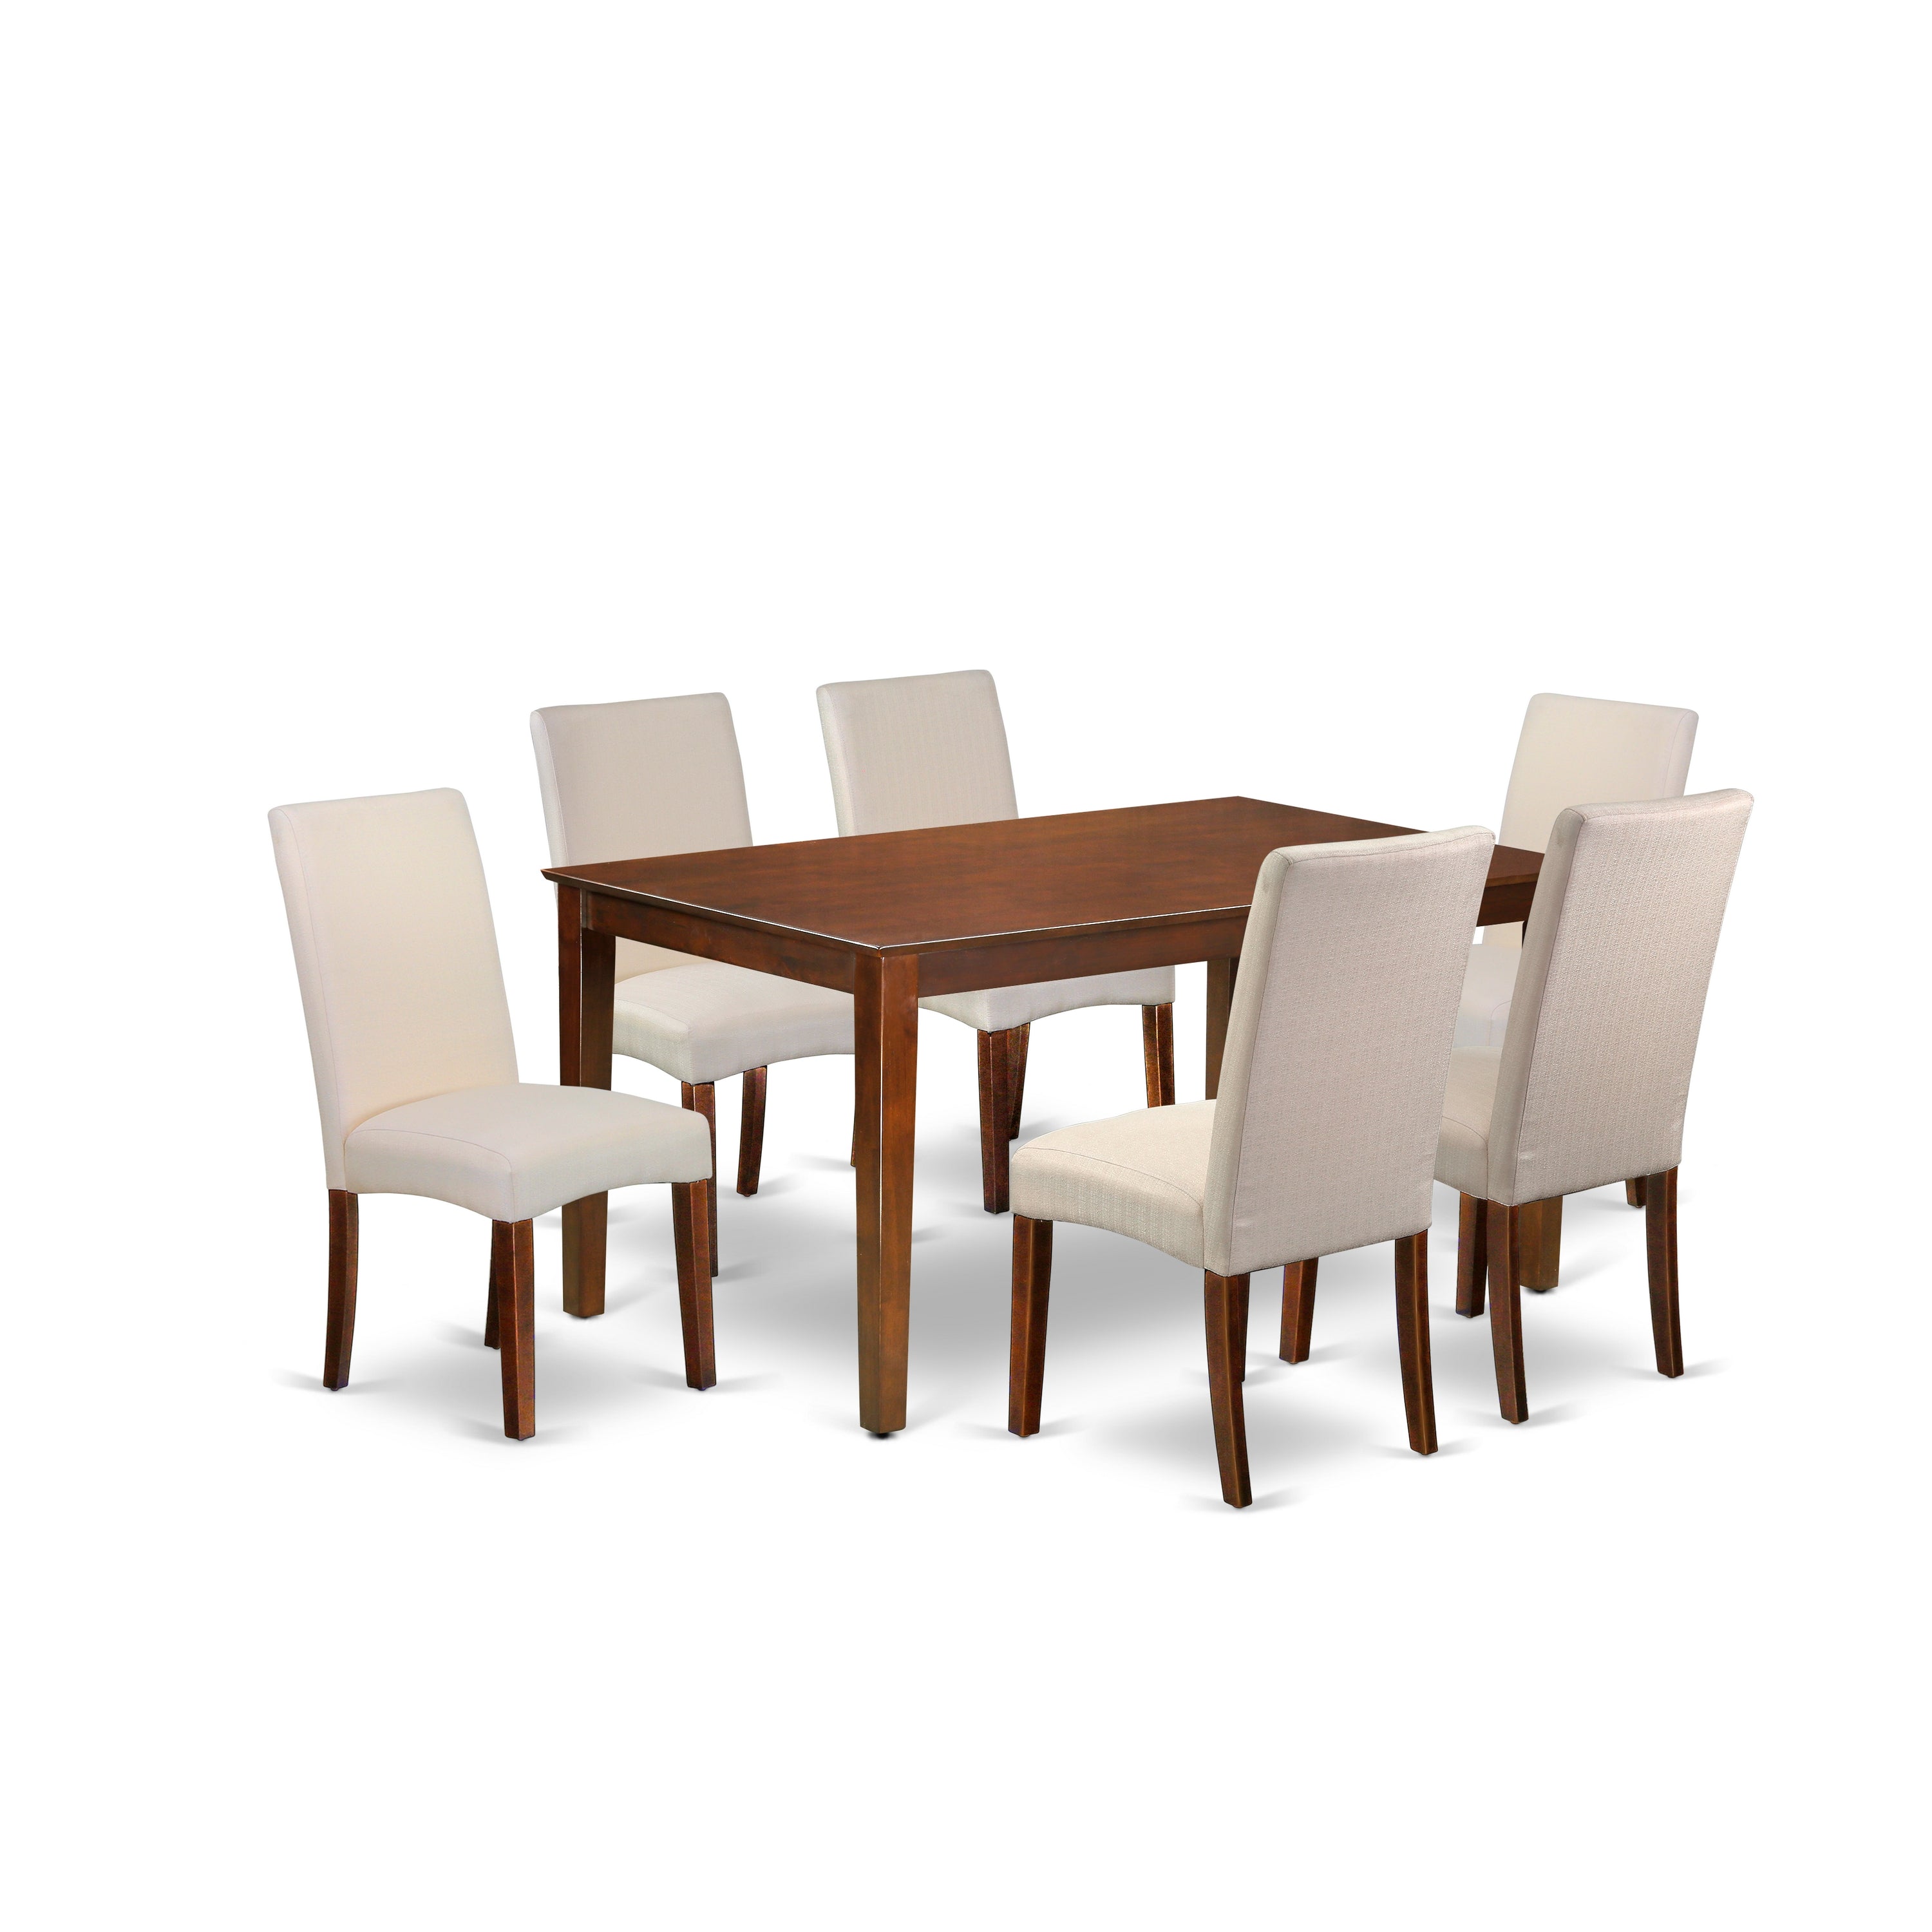 CADR7-MAH-01 7Pc Rectangle 60" Dining Table And 6 Parson Chair With Mahogany Finish Leg And Linen Fabric- Cream Color